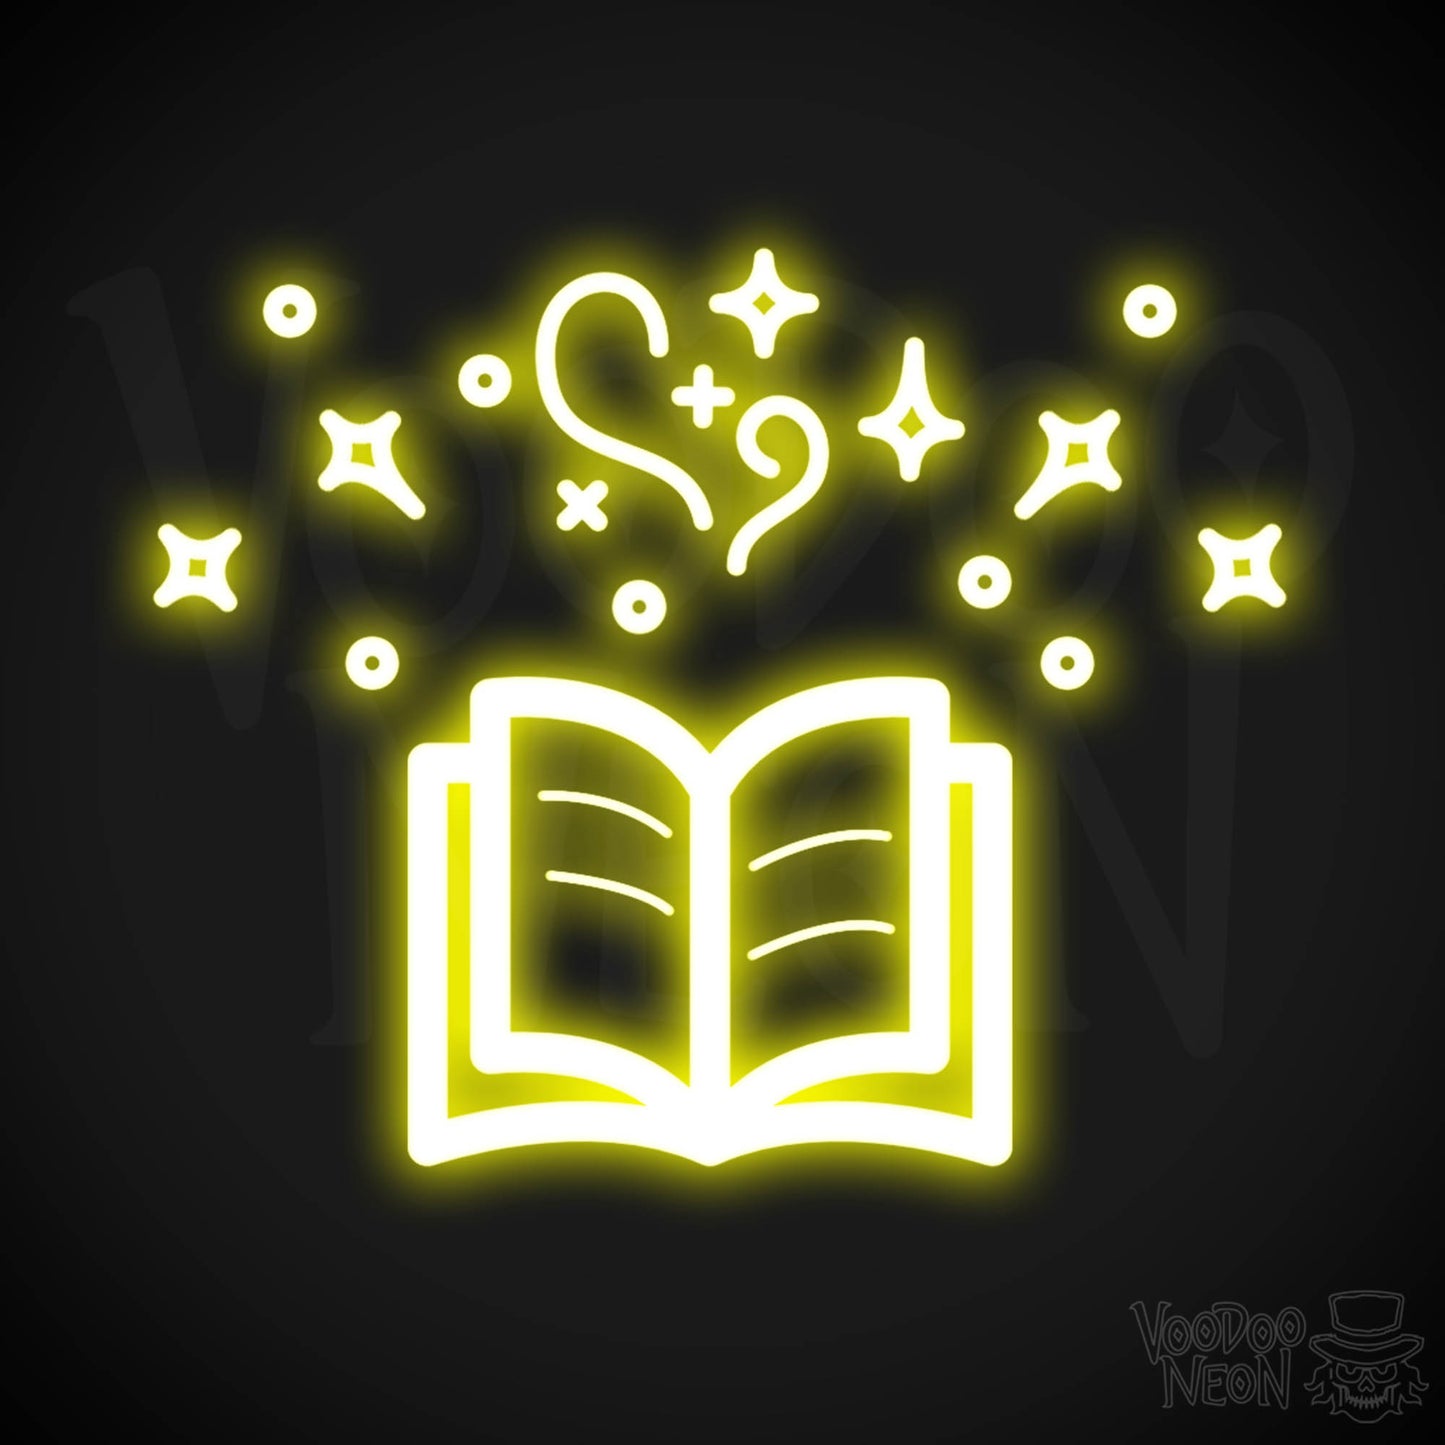 Neon Spell Book - Spell Book Neon Sign - LED Neon Wall Art - Color Yellow